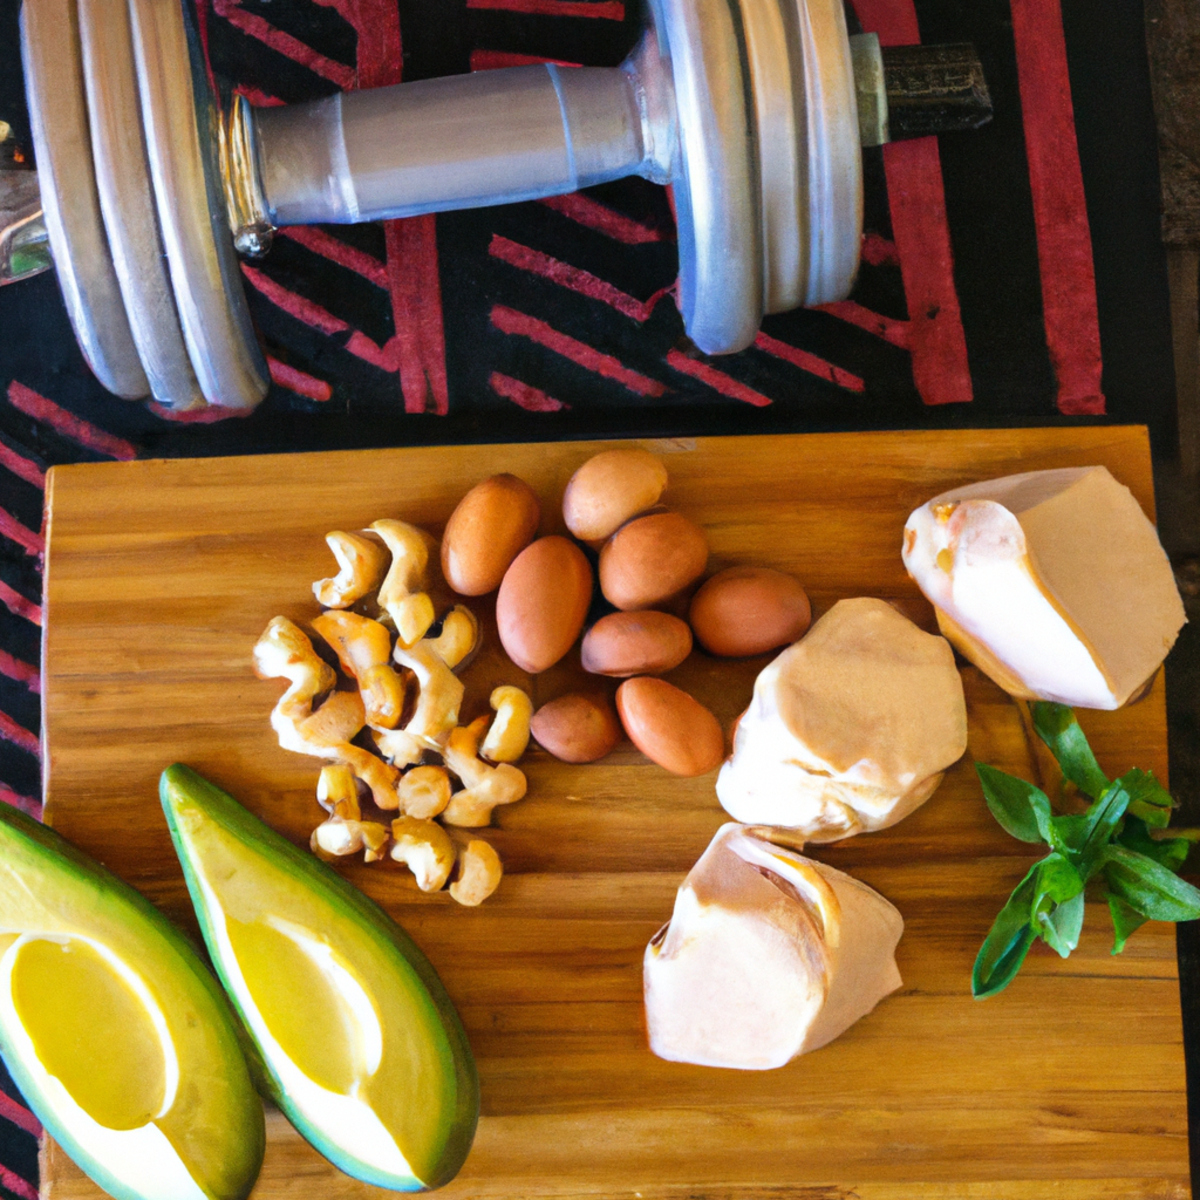 The photo shows a wooden cutting board with various keto-friendly foods arranged on it. There are slices of avocado, grilled chicken breast, hard-boiled eggs, and a small bowl of mixed nuts. In the background, there is a set of dumbbells and a yoga mat, suggesting the importance of exercise in conjunction with the keto diet. The lighting is bright and natural, highlighting the vibrant colors of the food. Overall, the photo conveys a sense of health and wellness, encouraging readers to adopt a keto diet and exercise routine for weight loss and improved fitness.